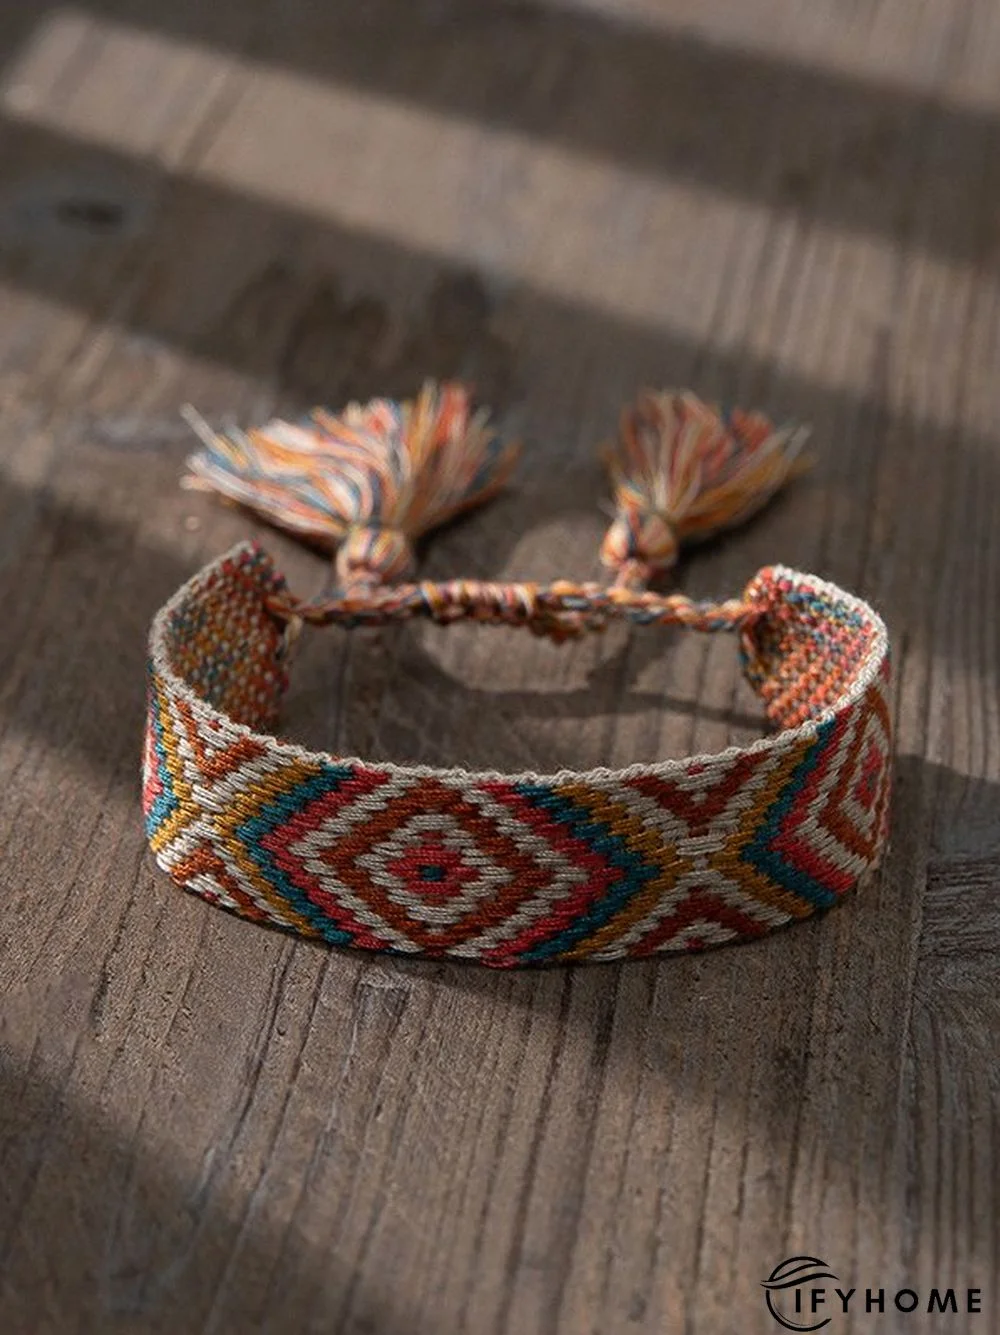 Ethnic Vintage Woven Embroidered Cotton Linen Hand Rope Bracelet Bohemian Holiday Style Jewelry | IFYHOME